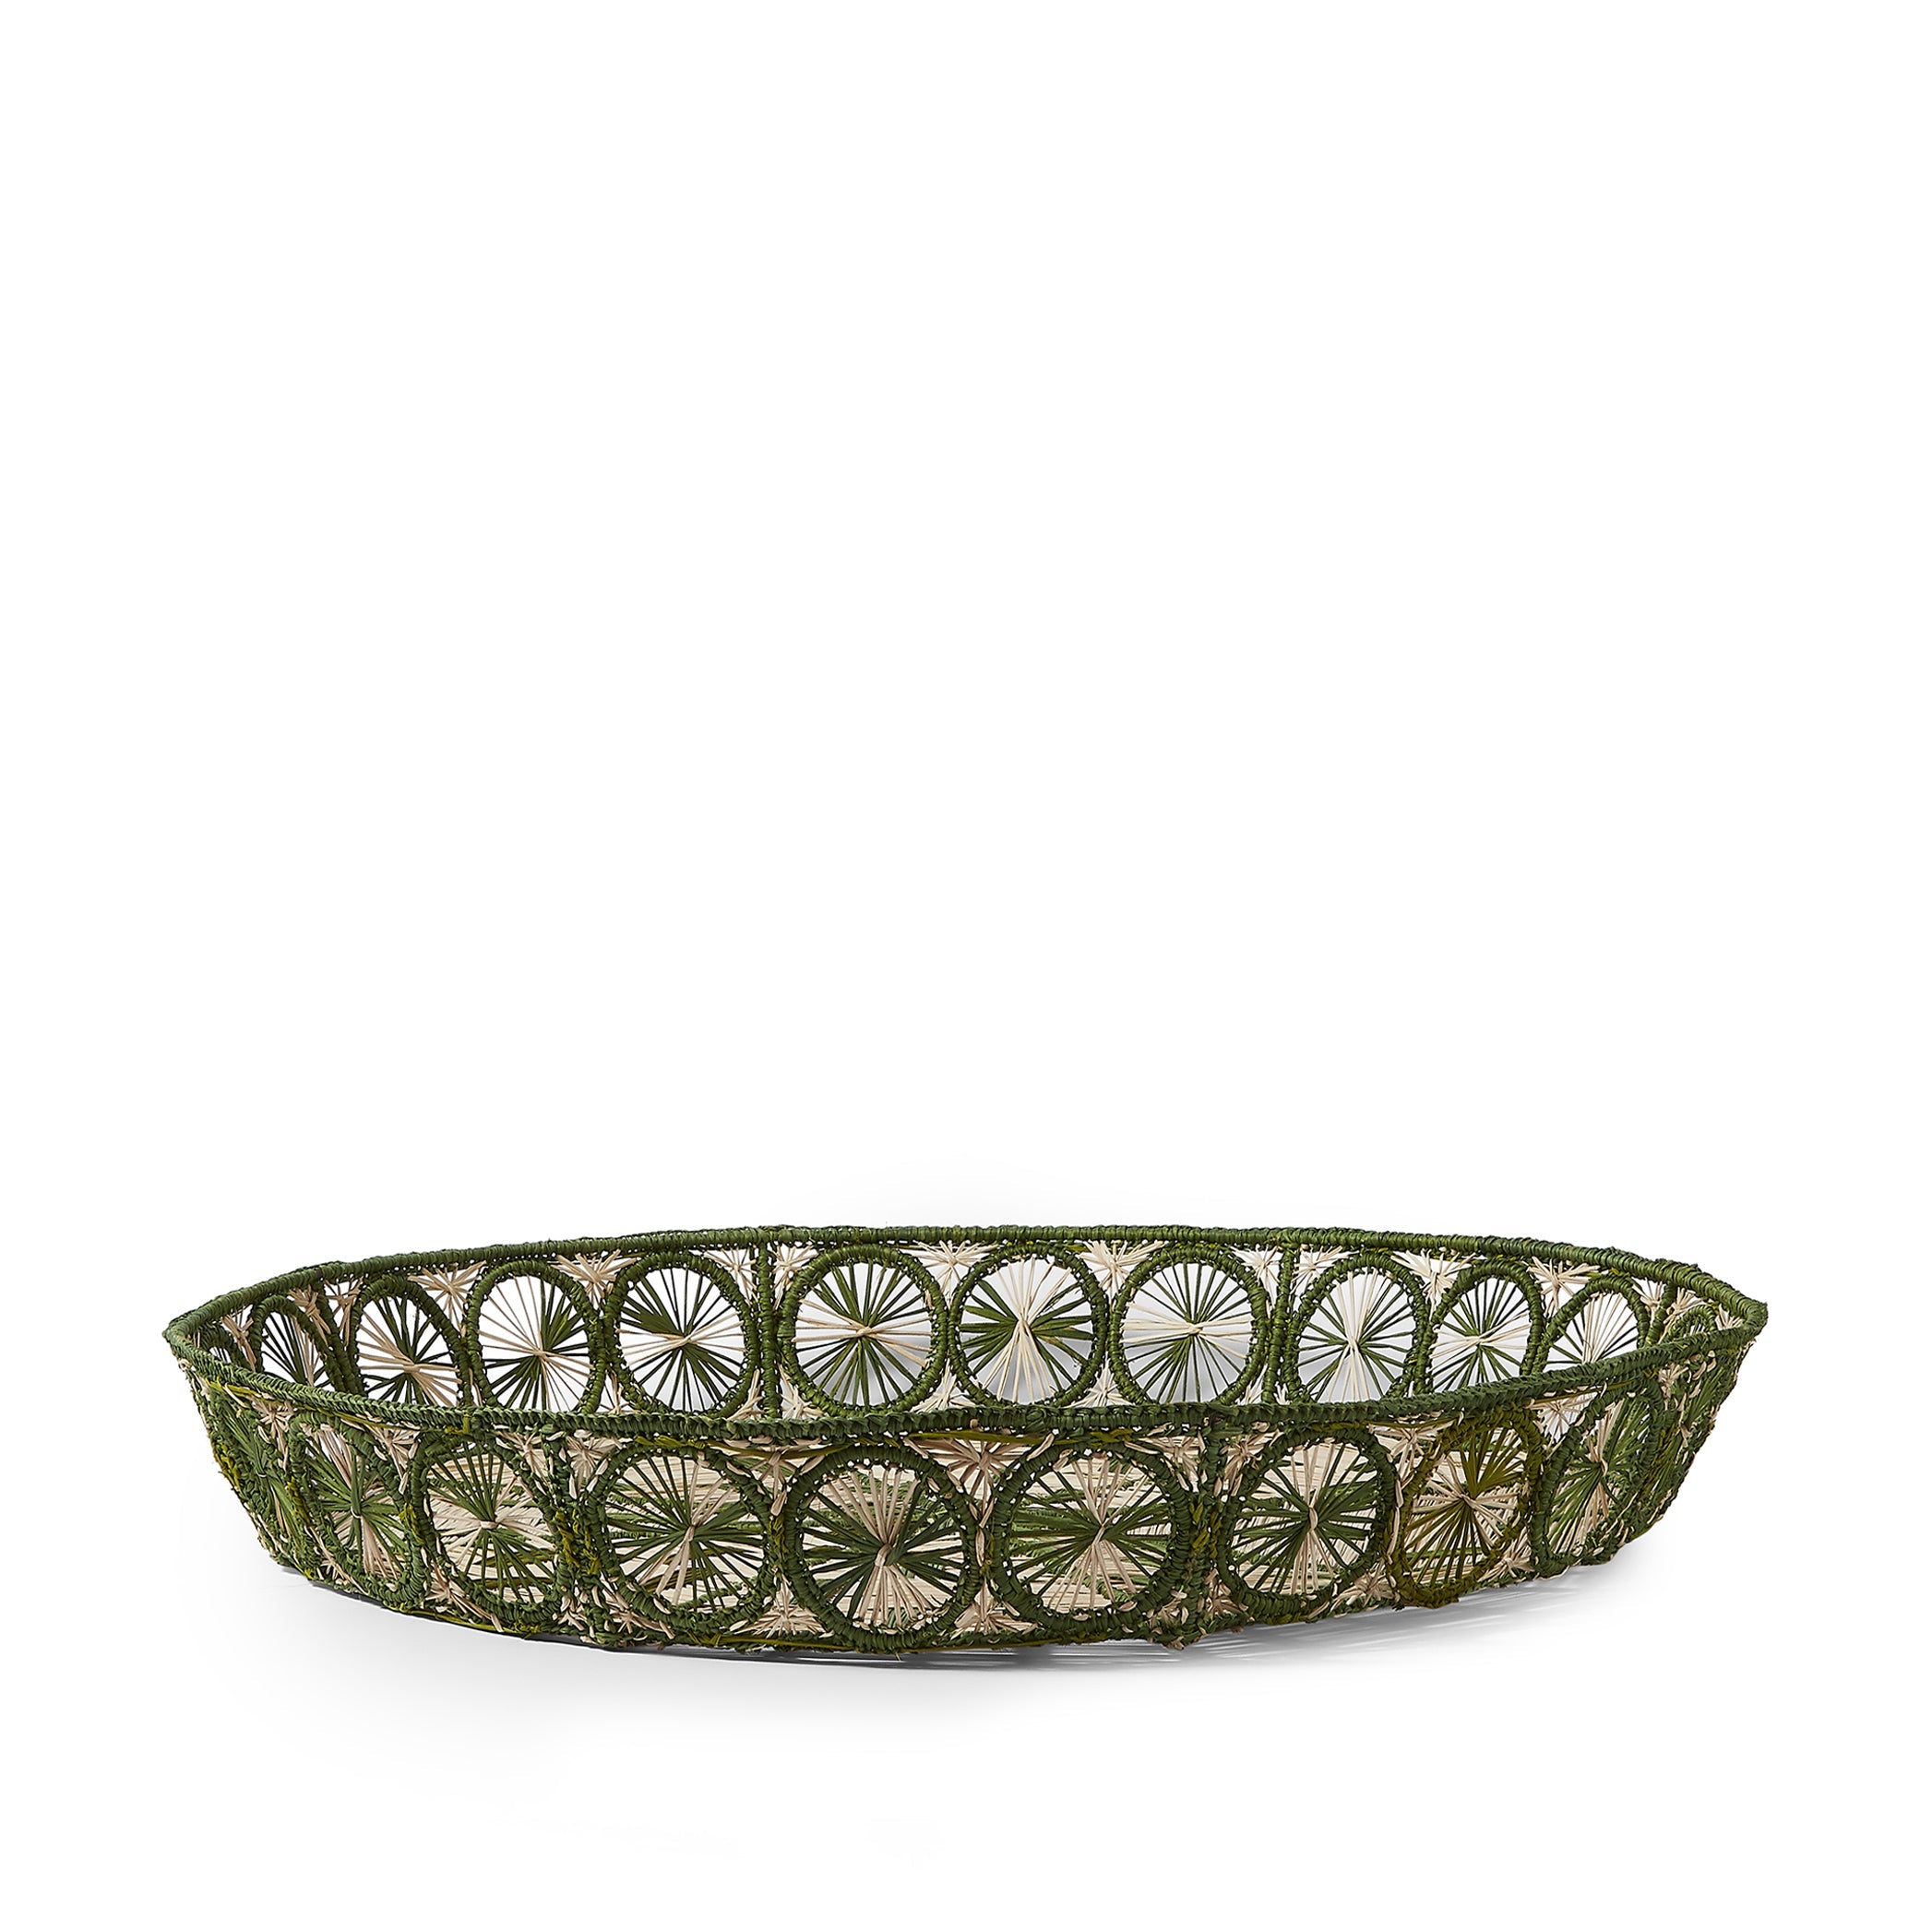 Handwoven Round Tray in Natural and Green, 50cm